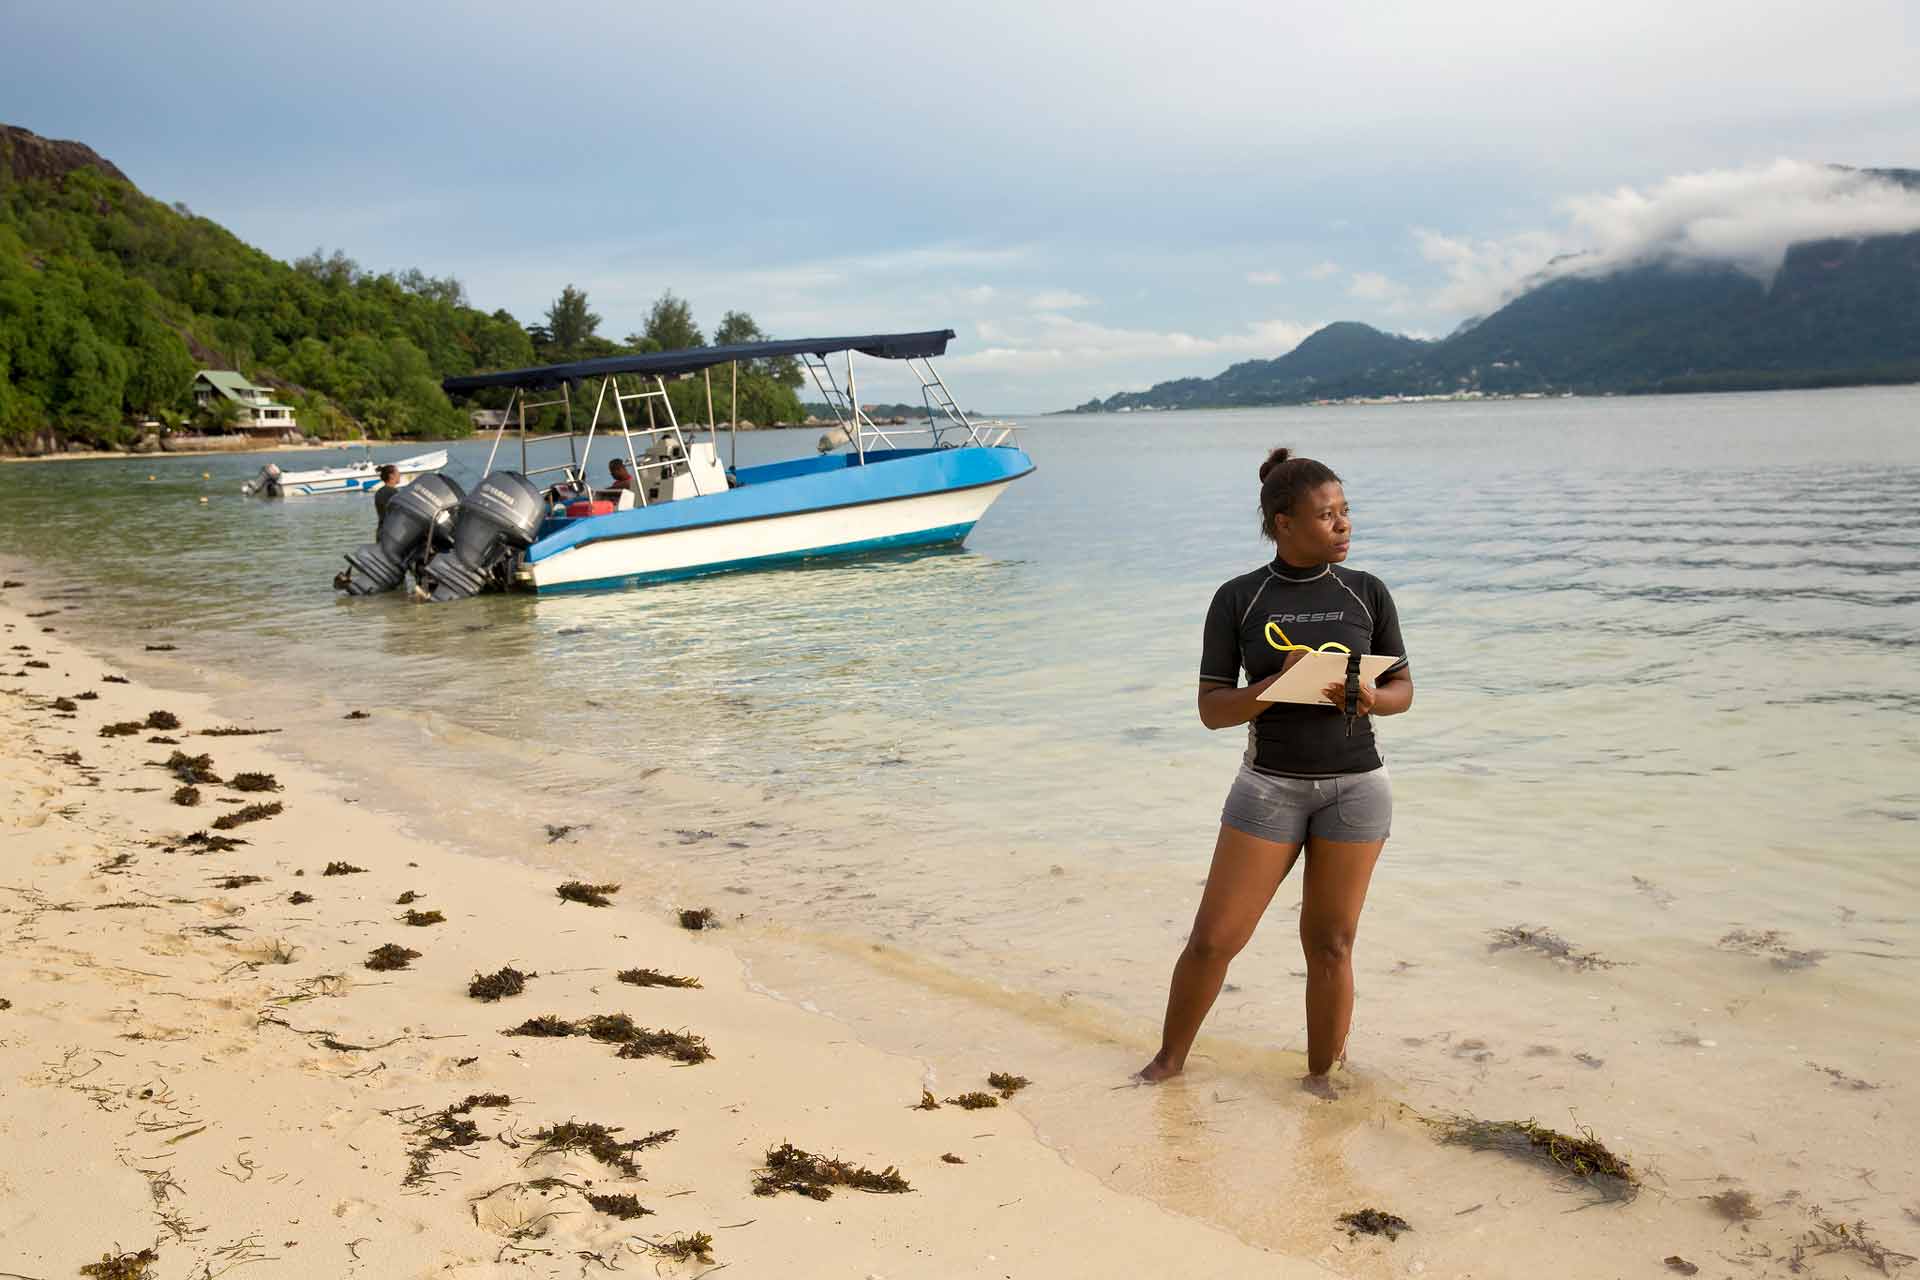 Sylvanna Antat, a Marine Research Officer in Seychelles, maps coral reefs - which help prevent coastal erosion.